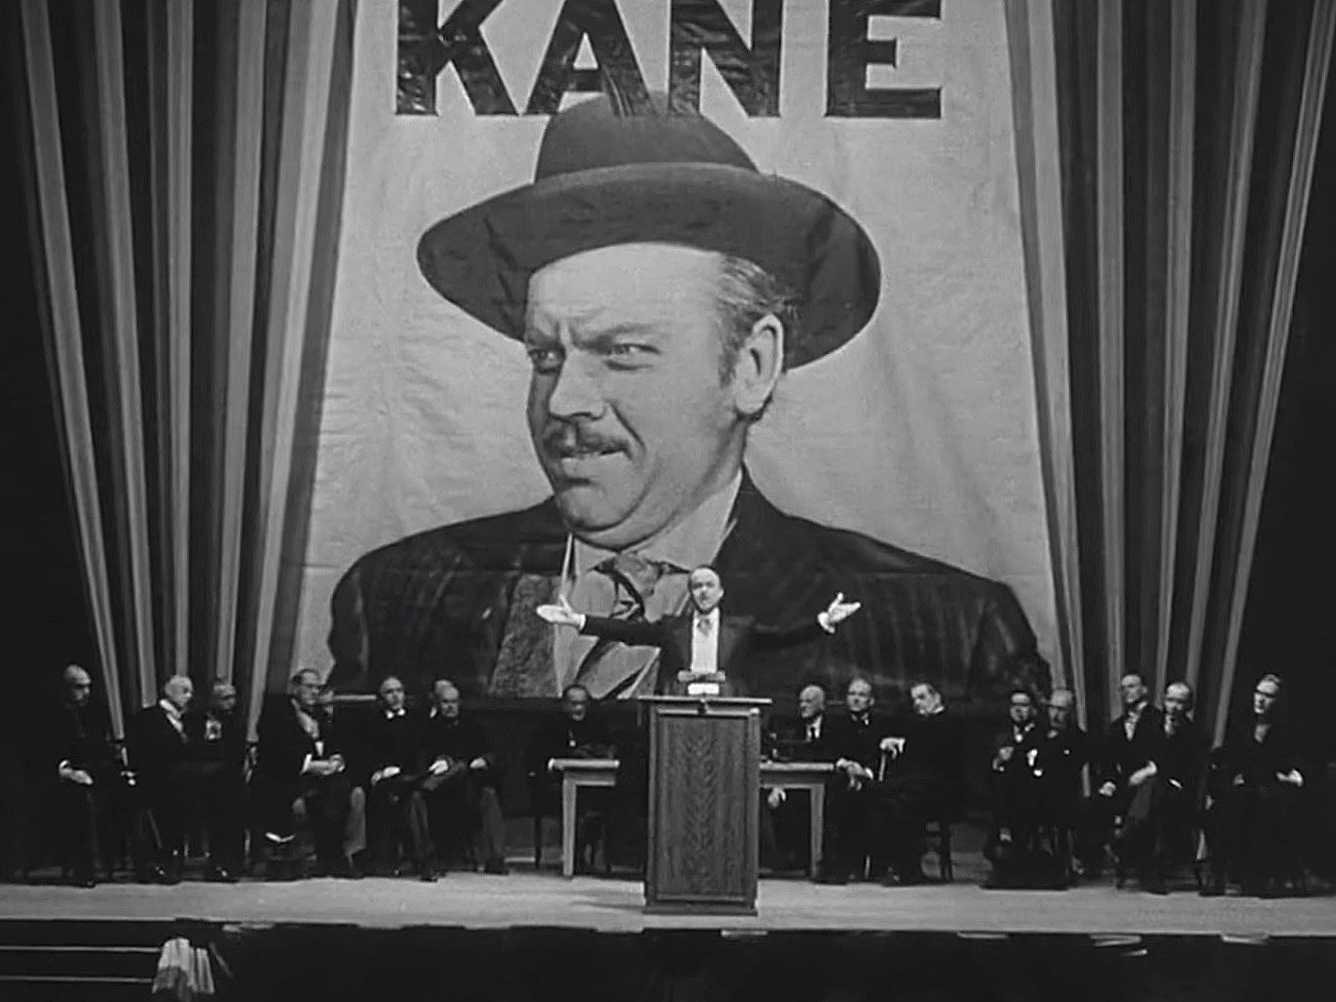 Can You Go 15/15 on This Incredibly Easy Movie Quiz? Citizen Kane